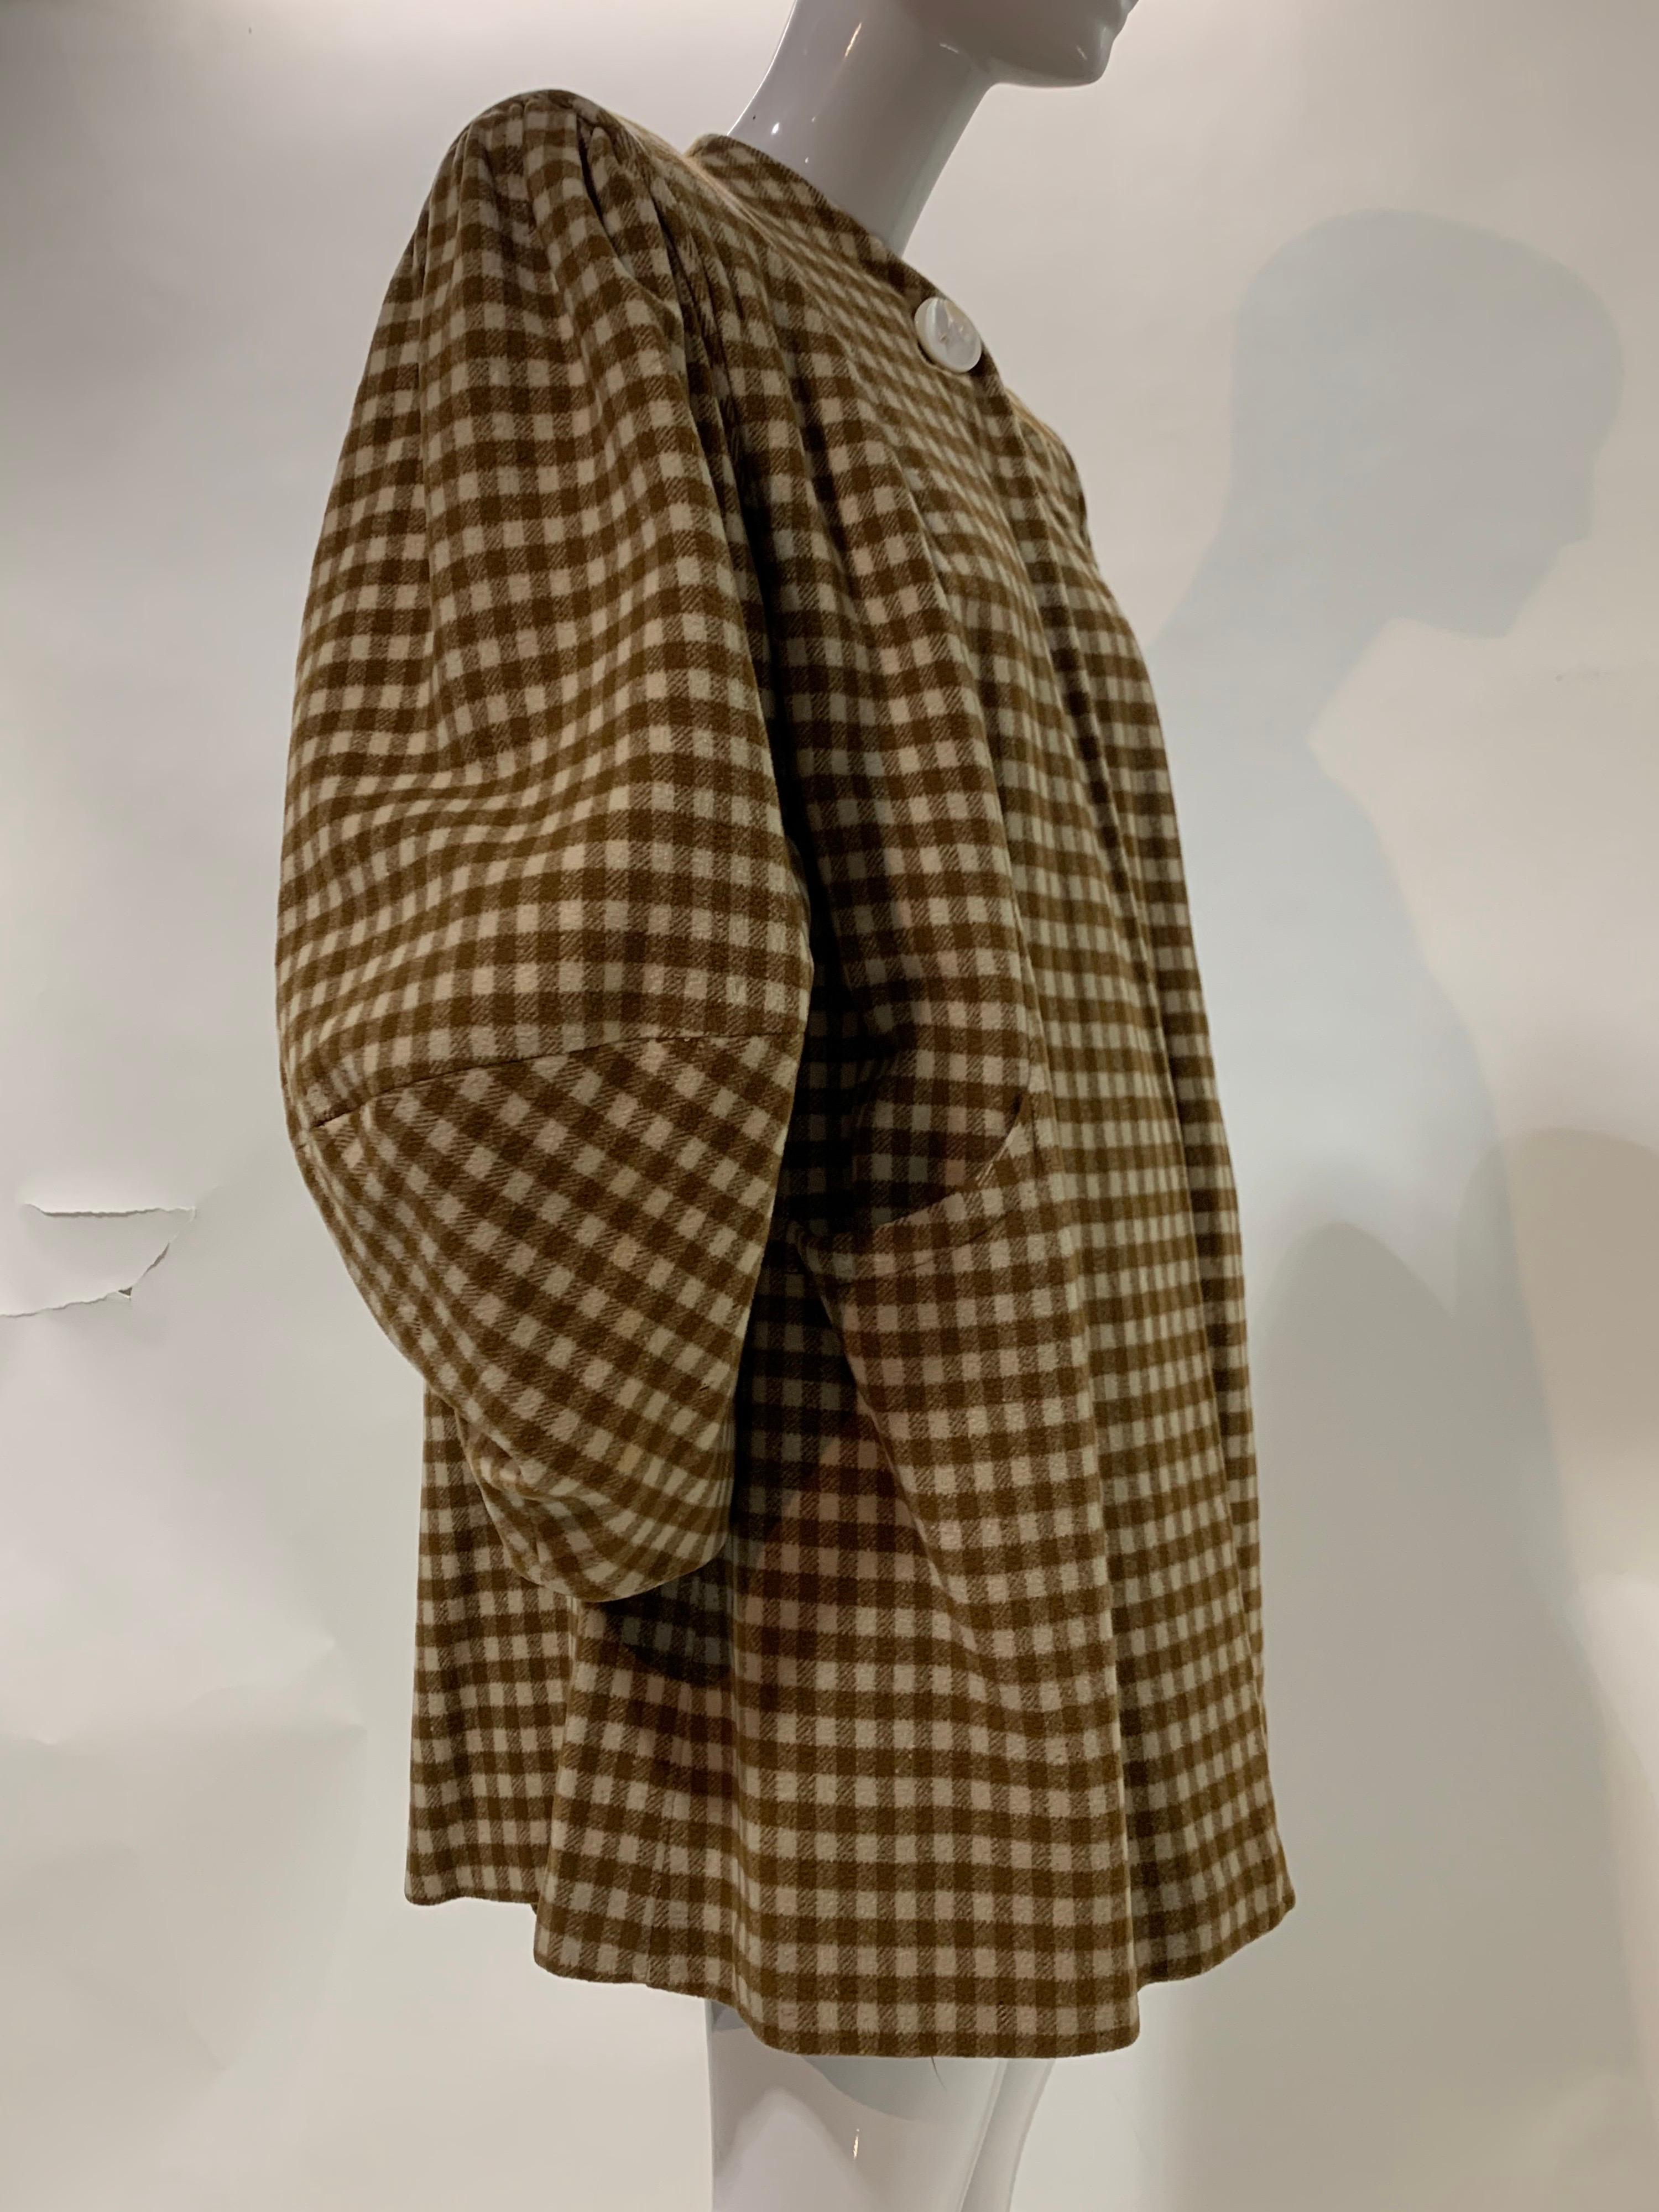 1940 Caramel Check Wool Swing Coat W/ Lantern Cut Sleeve & Structured Shoulders In Good Condition For Sale In Gresham, OR